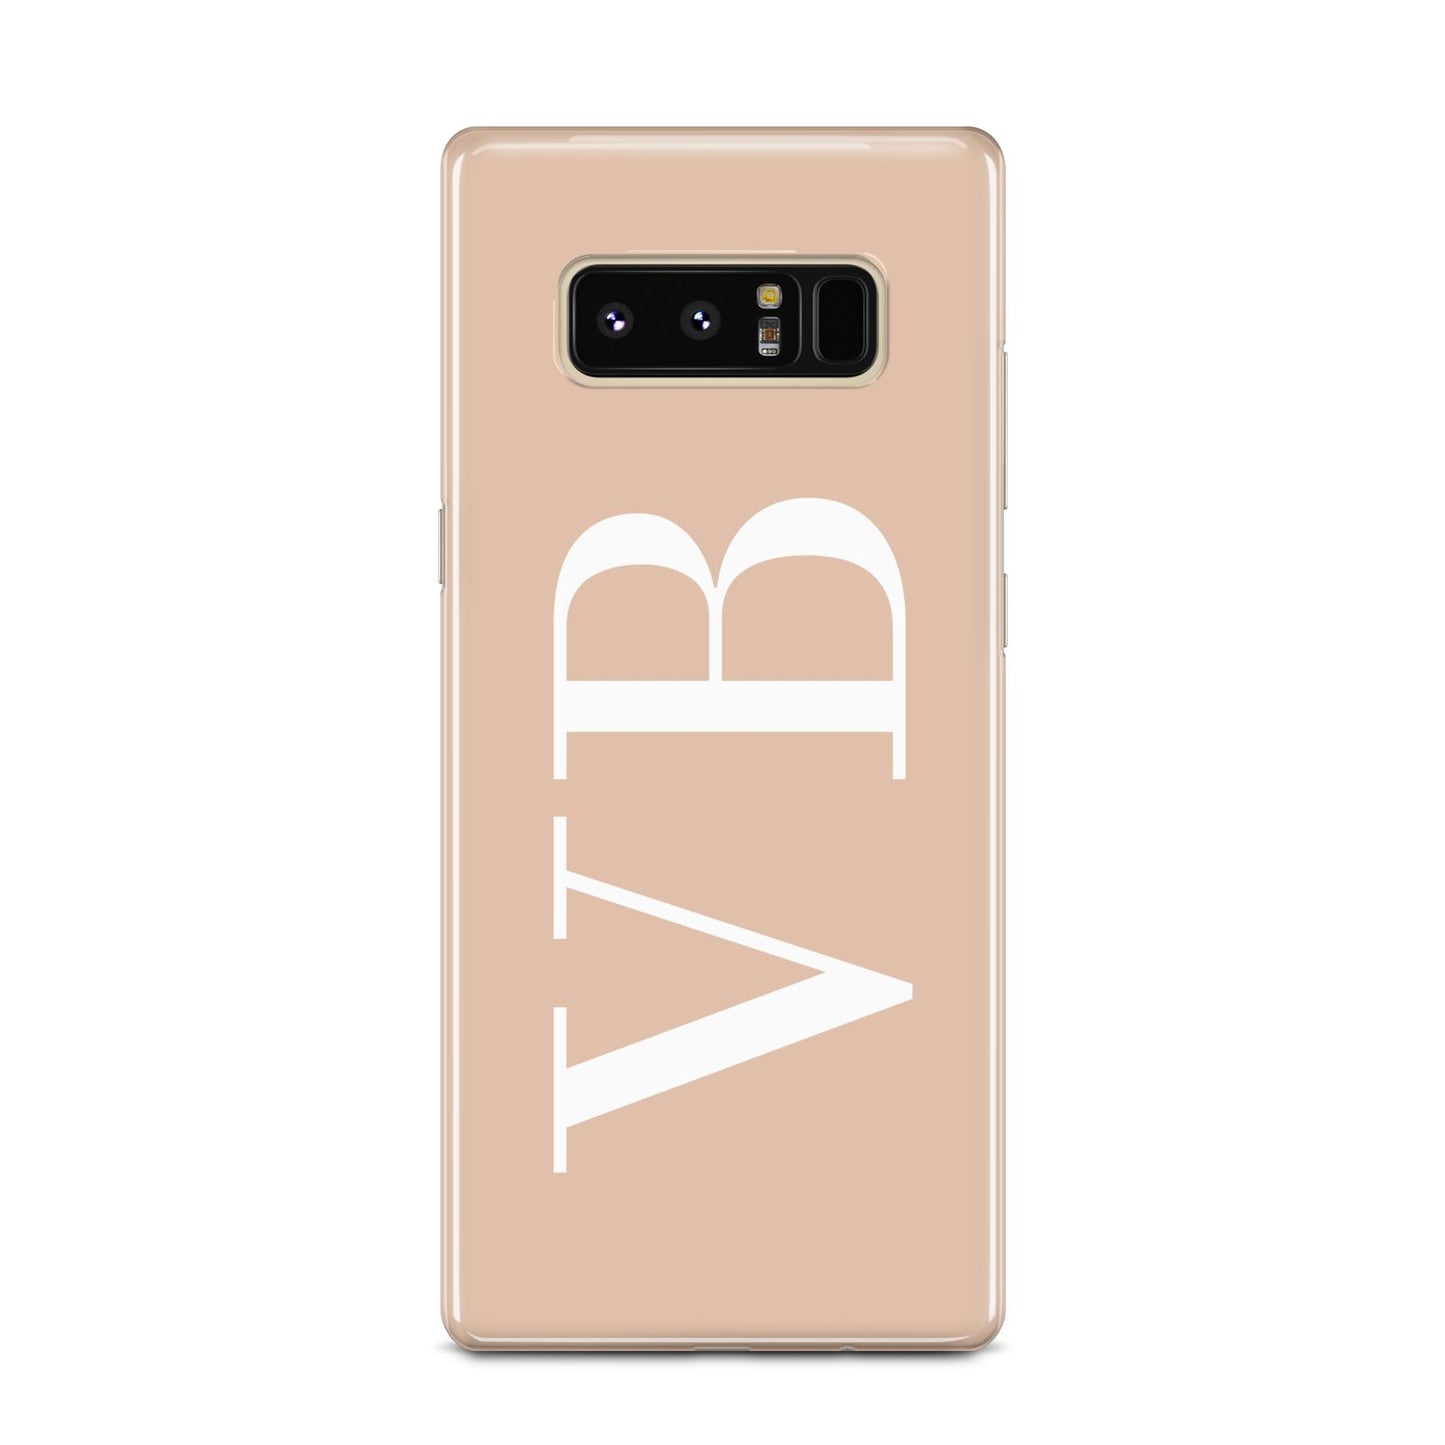 Nude And White Personalised Samsung Galaxy Note 8 Case